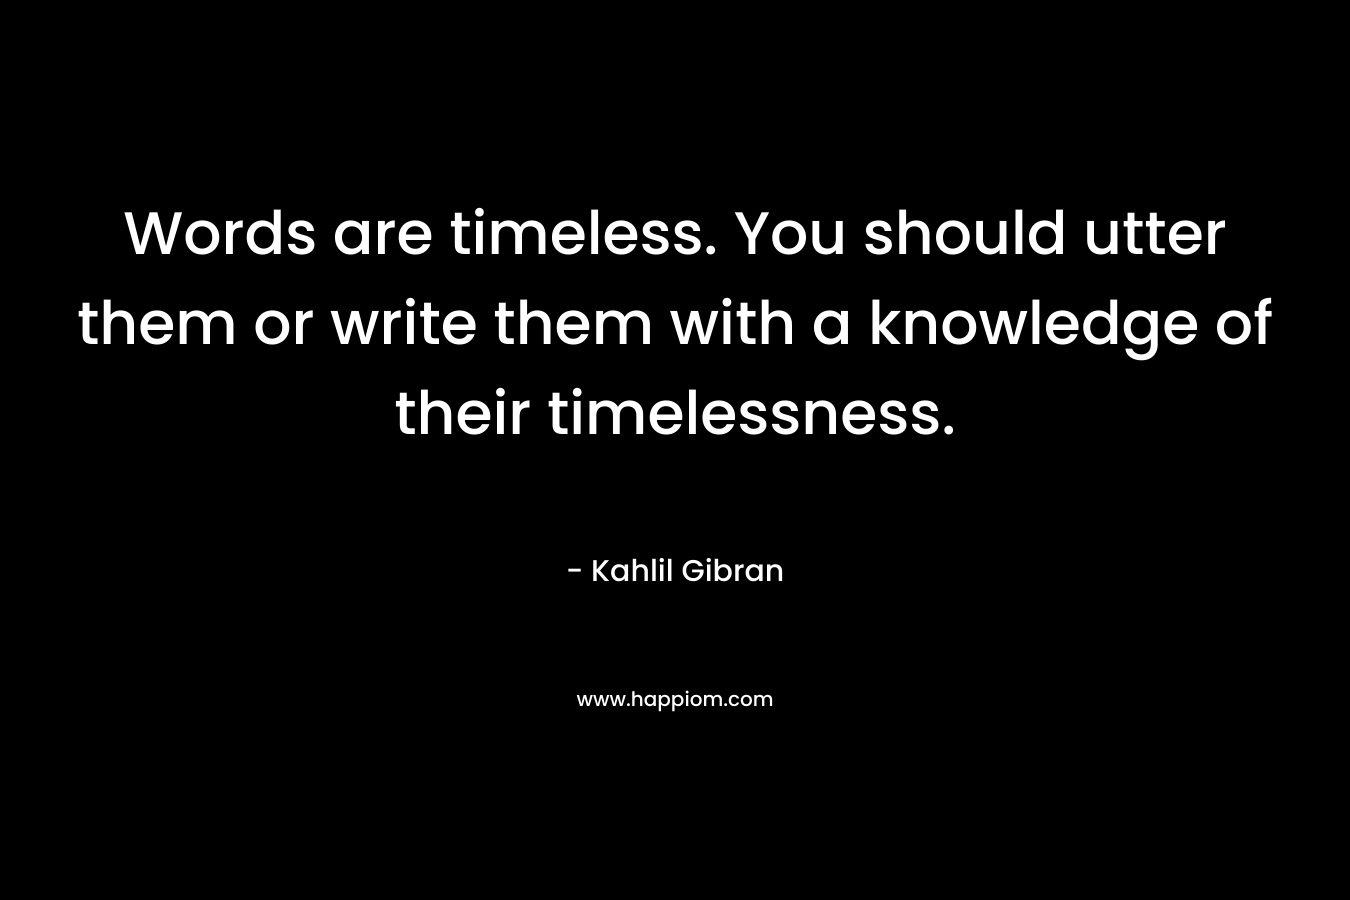 Words are timeless. You should utter them or write them with a knowledge of their timelessness.